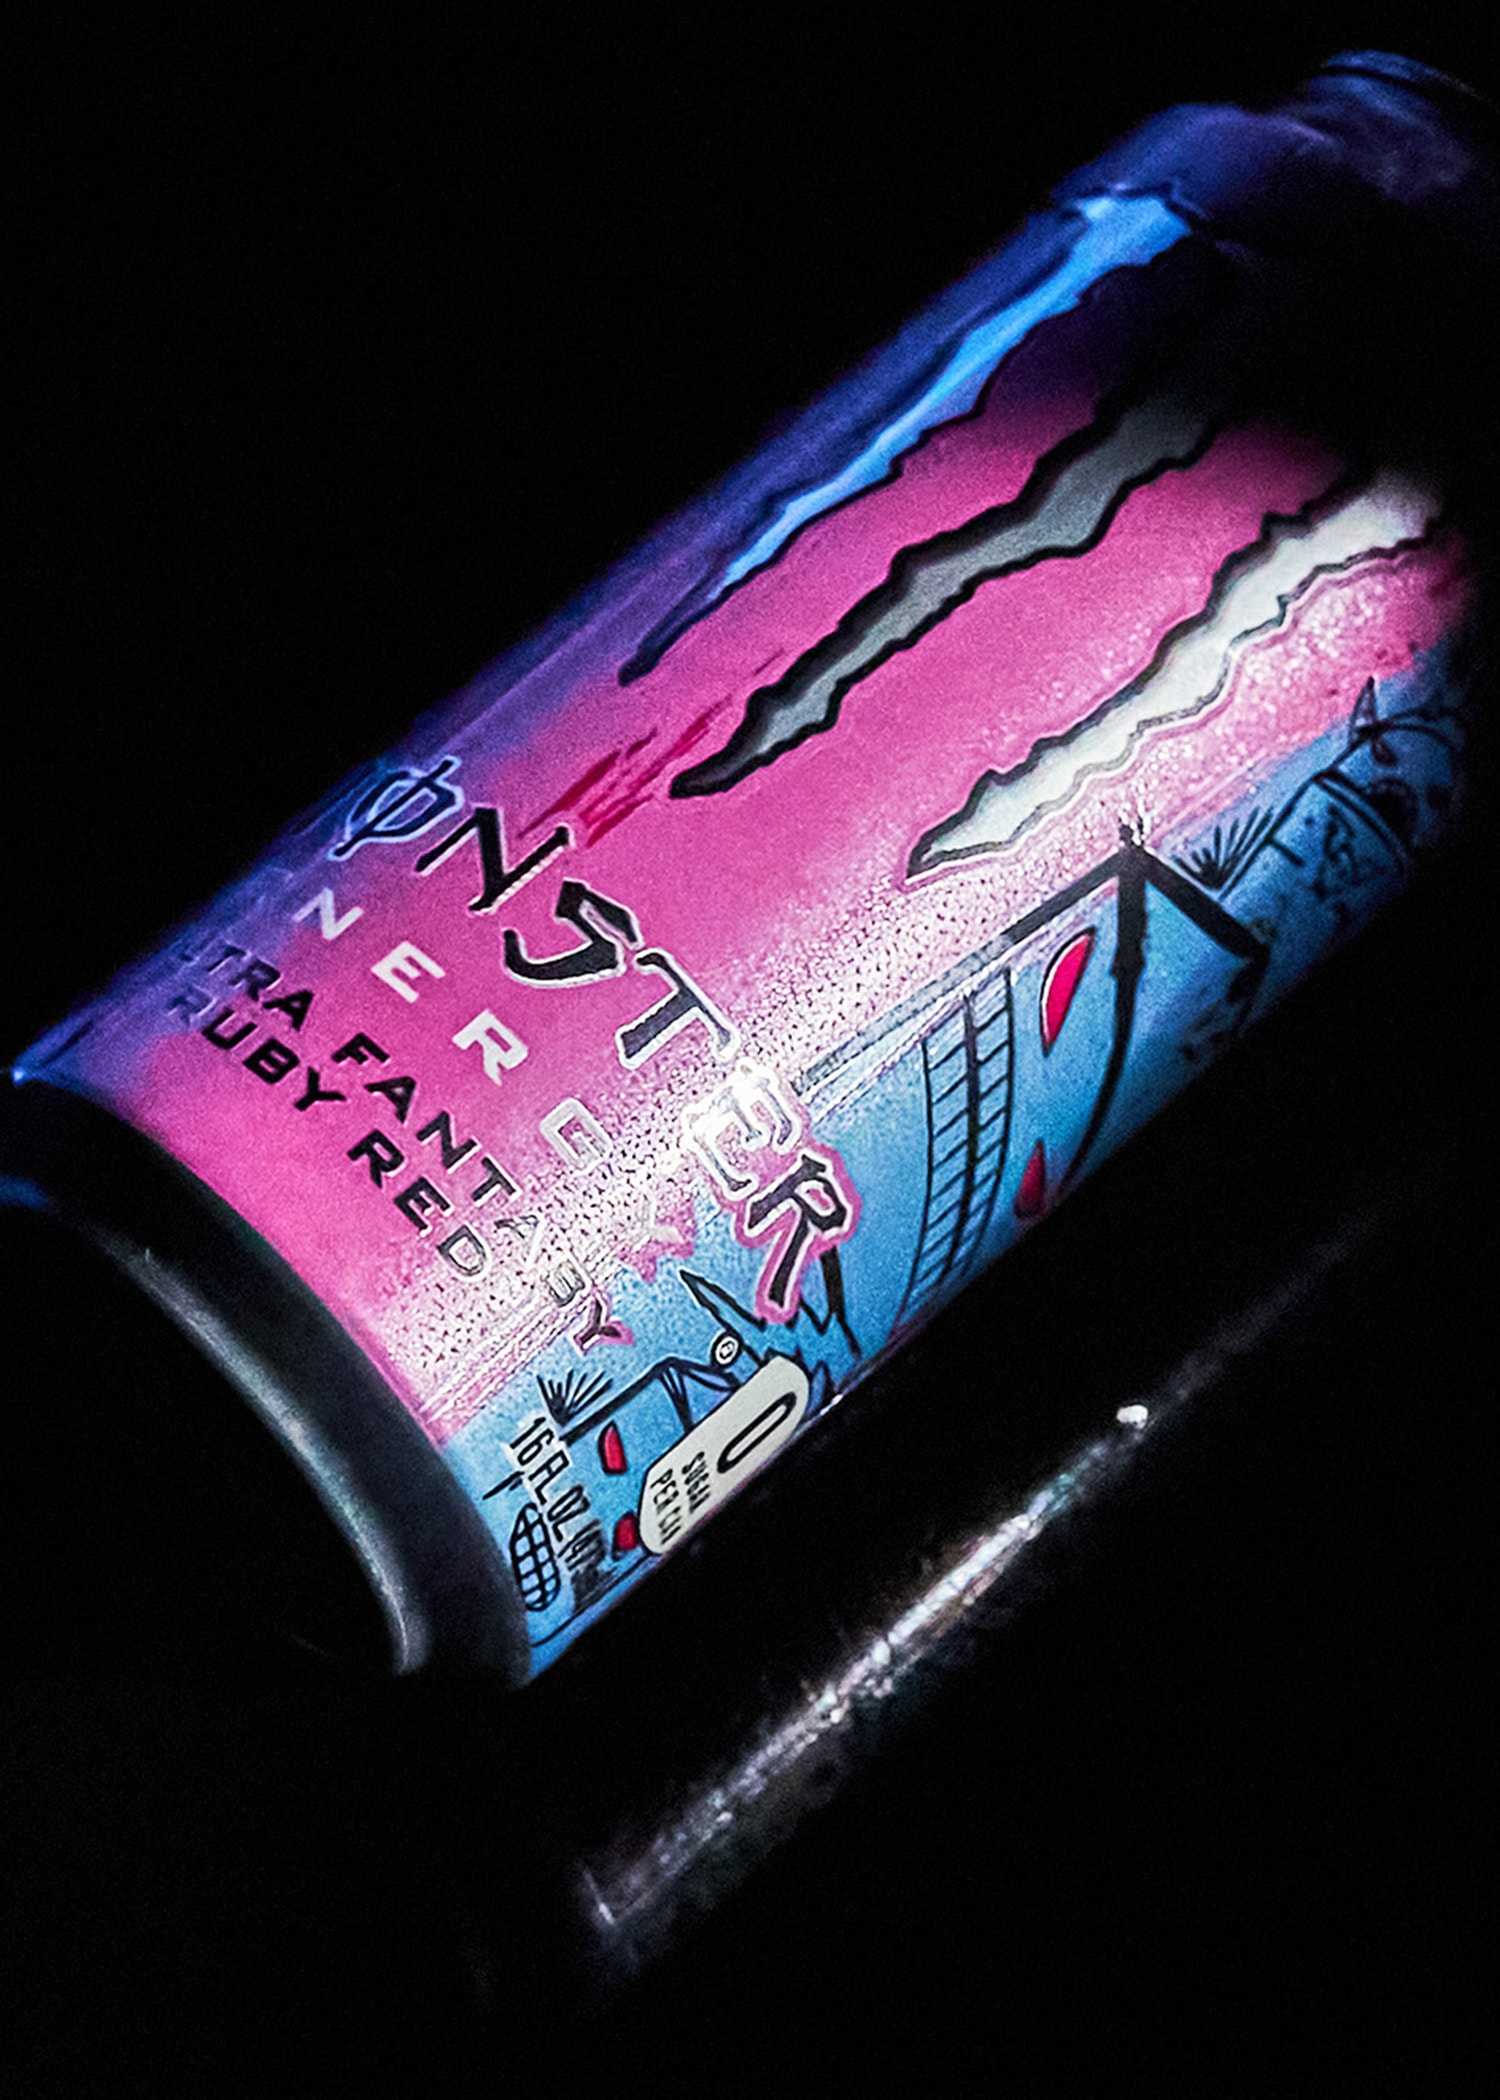 Mark "Pinky" Taylor Designs Playful Cans for Monster Energy Ultra Fantasy Ruby Red